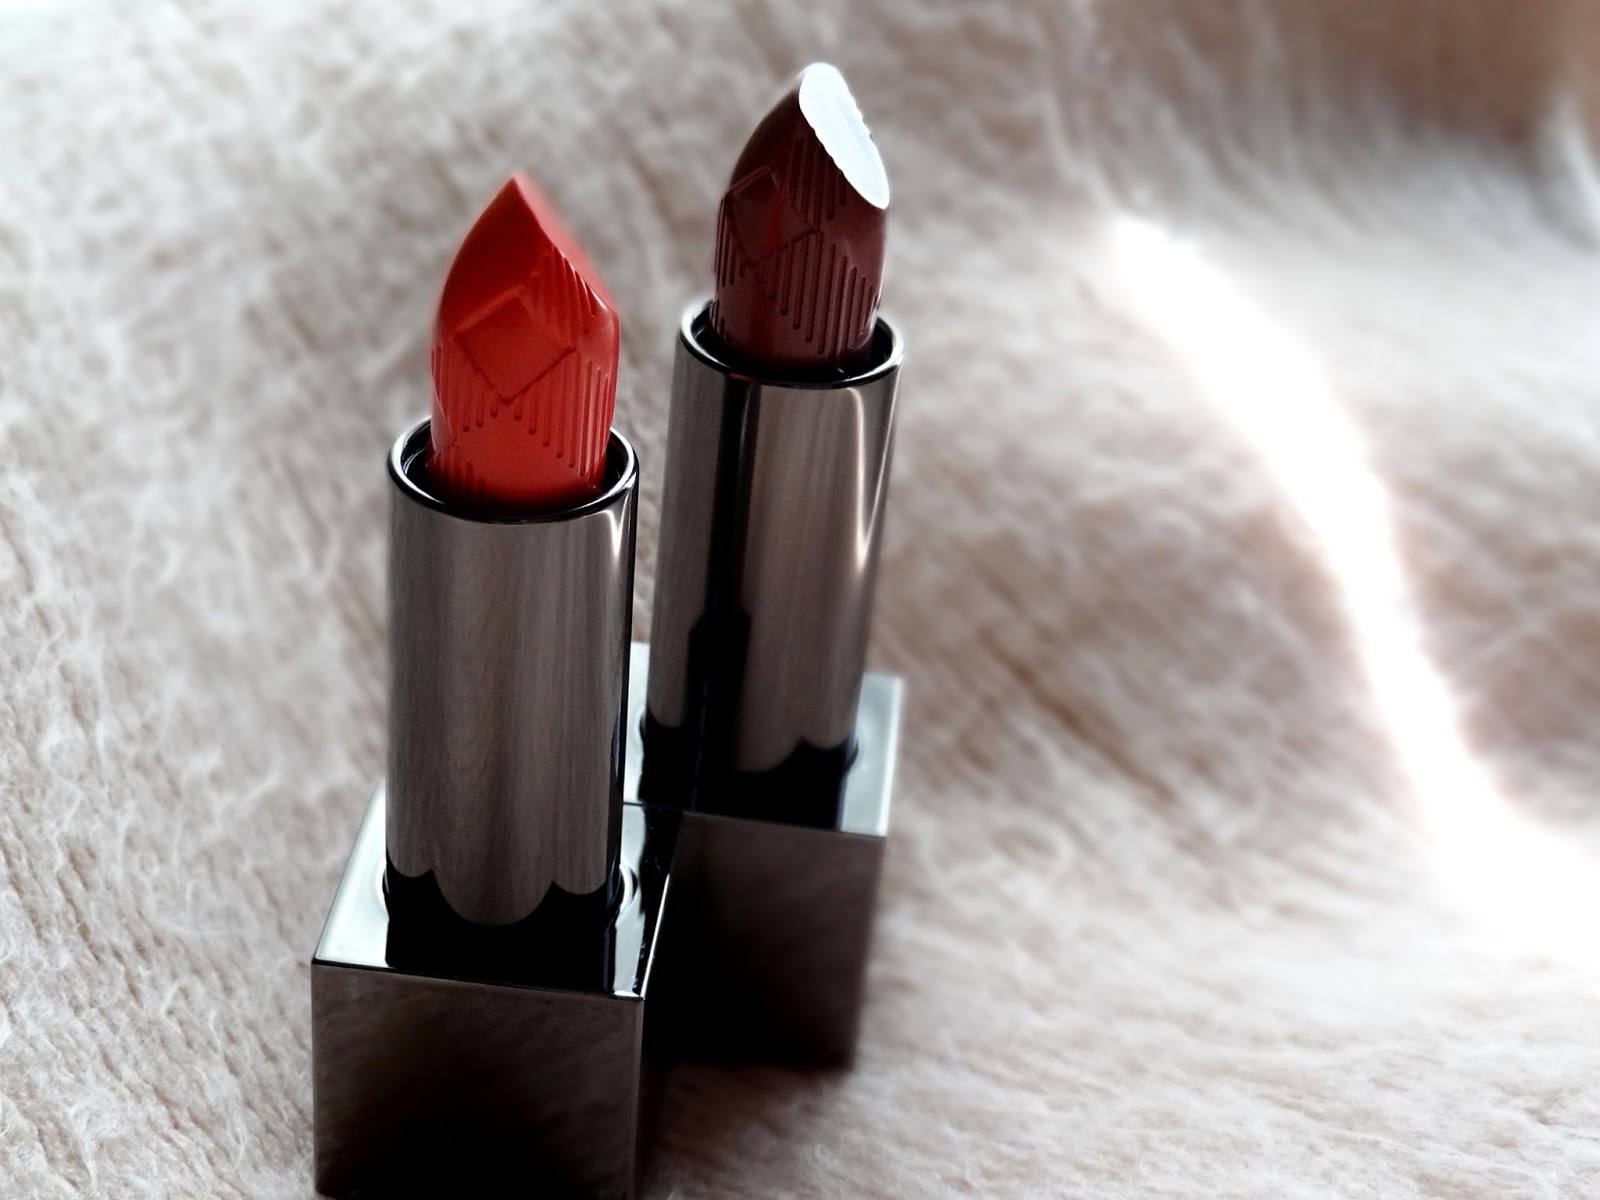 Burberry Kisses Lipsticks in Rose Blush, Coral Pink Review, Photos & Swatches